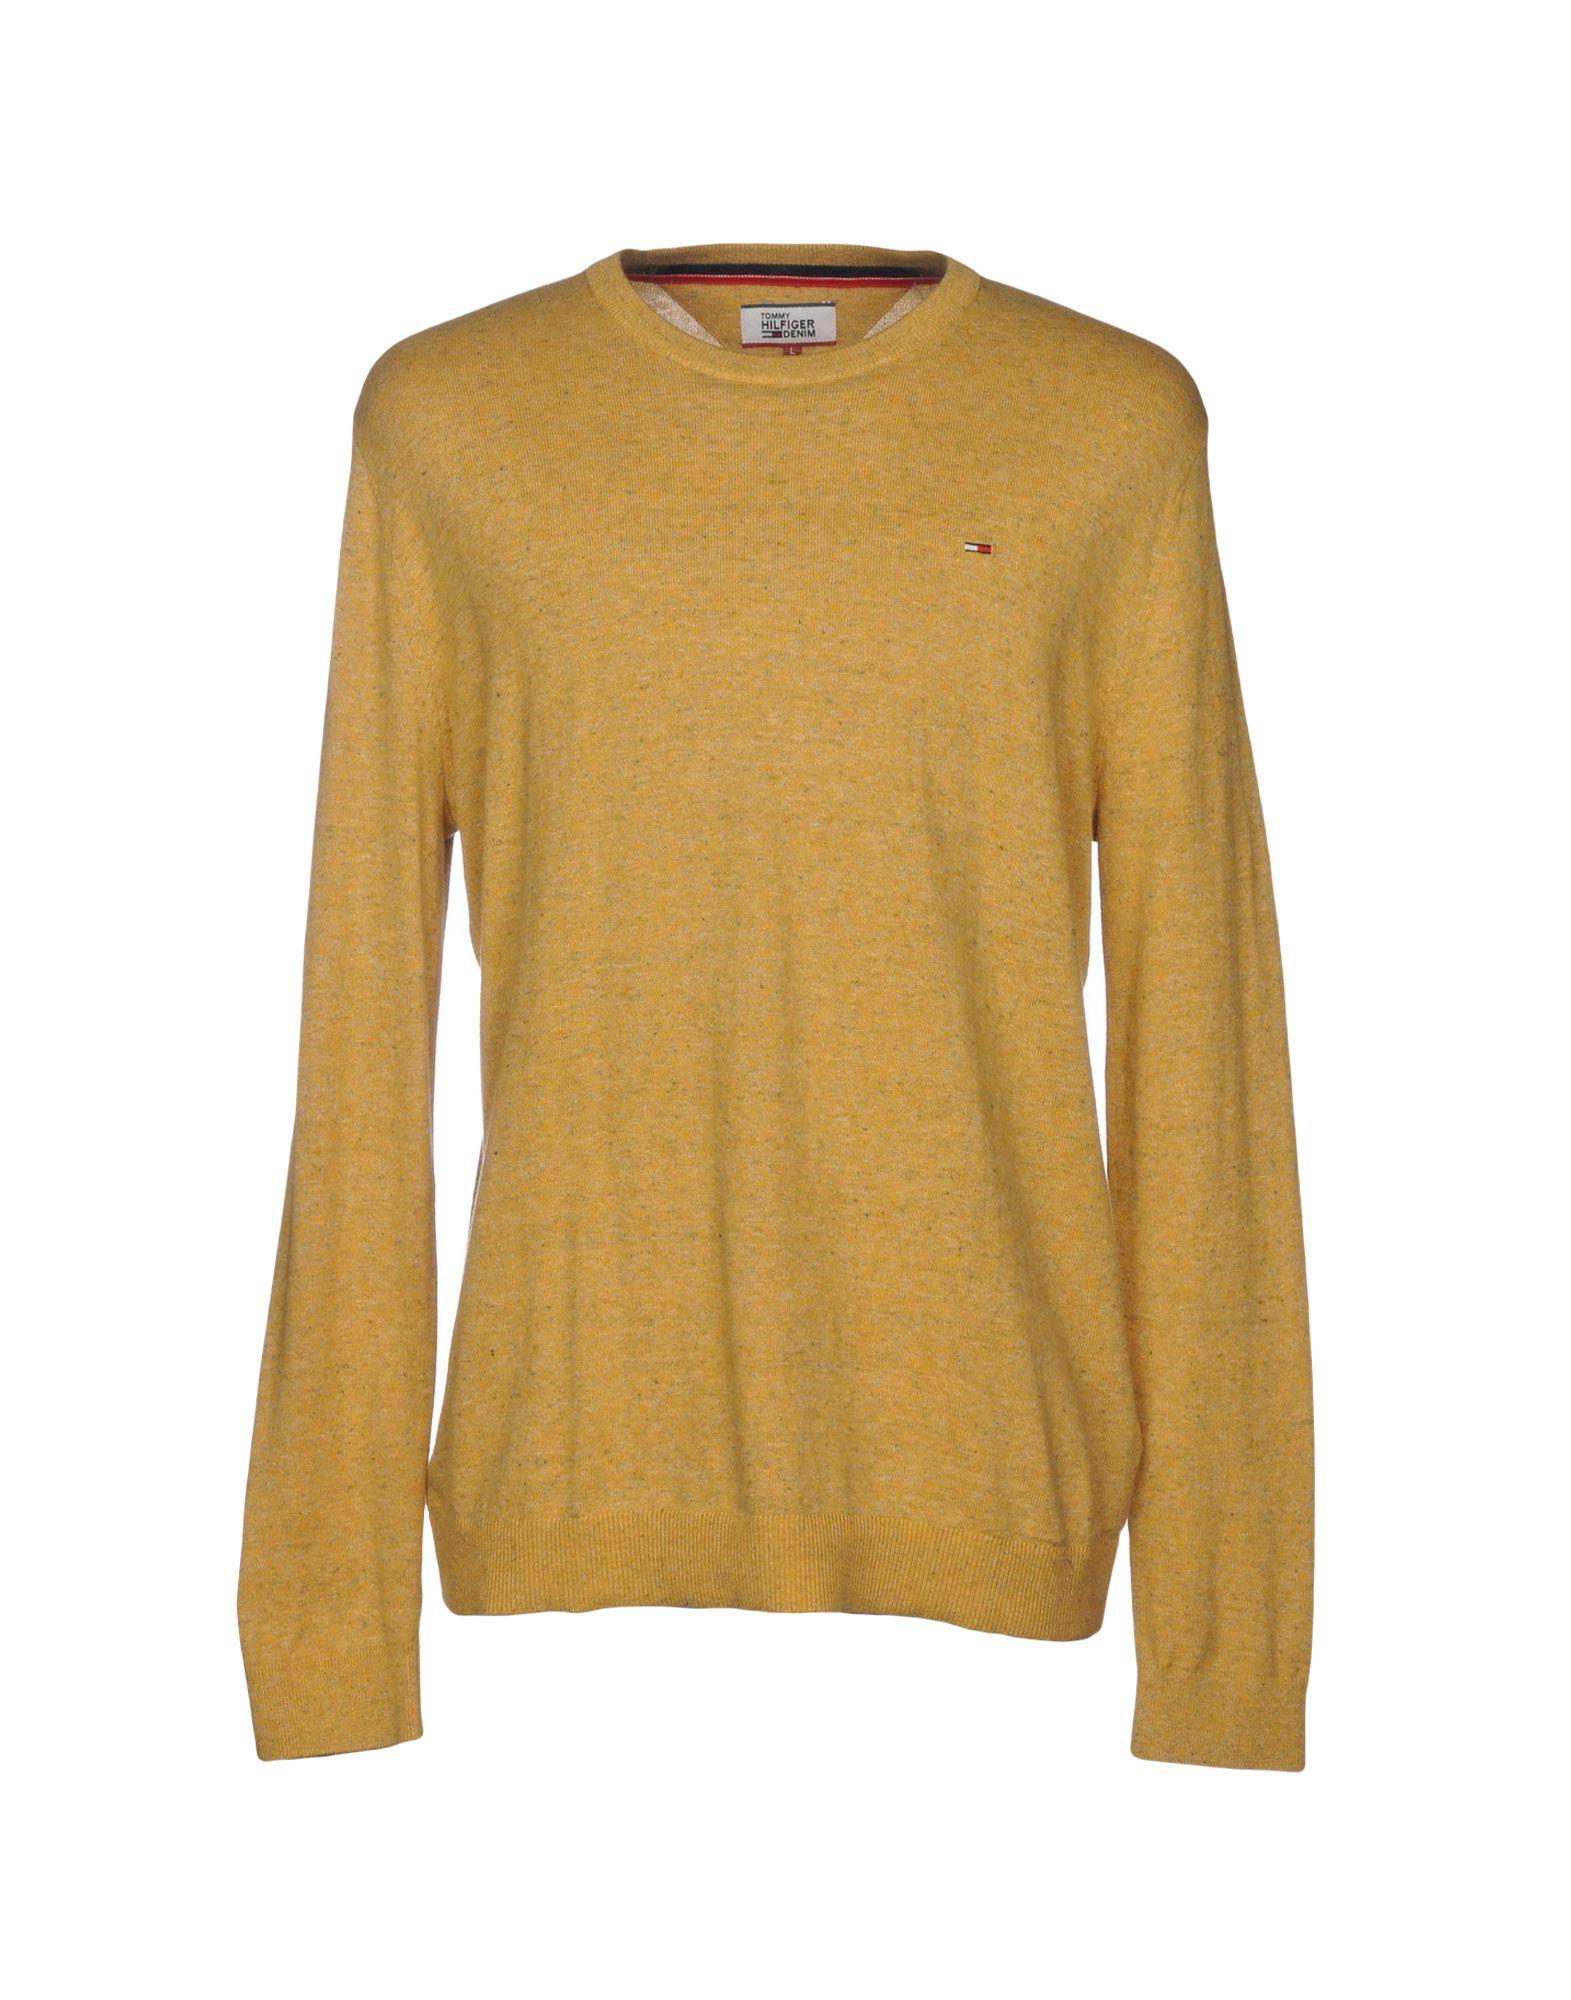 Tommy Hilfiger Sweater in Yellow for Men - Lyst